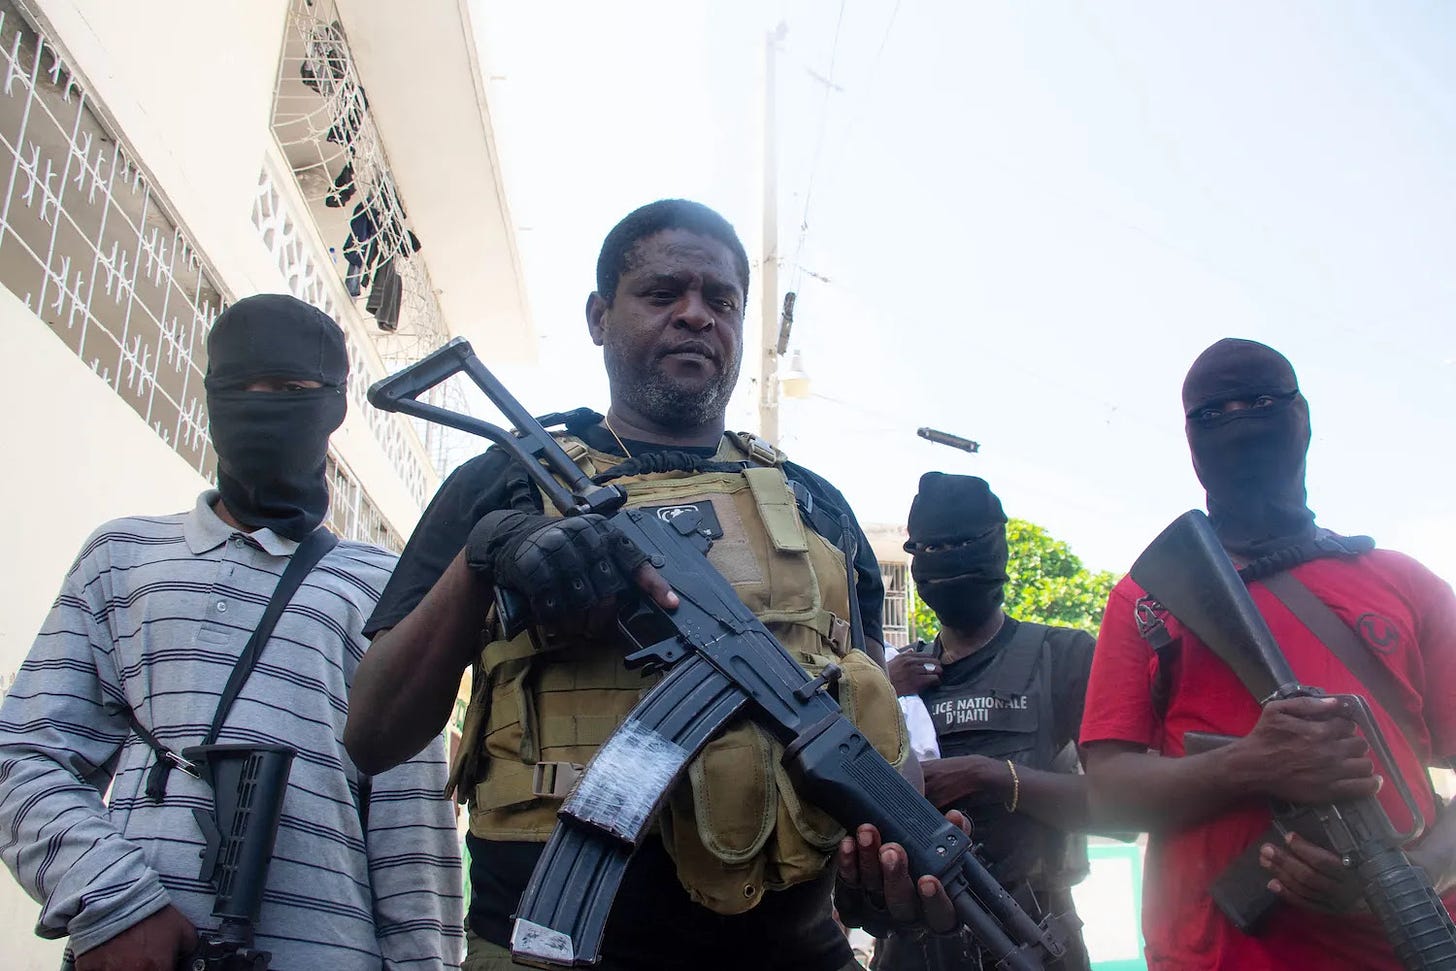 Armed gang leader Jimmy “Barbecue” Chérizier and his men are seen in Haiti.